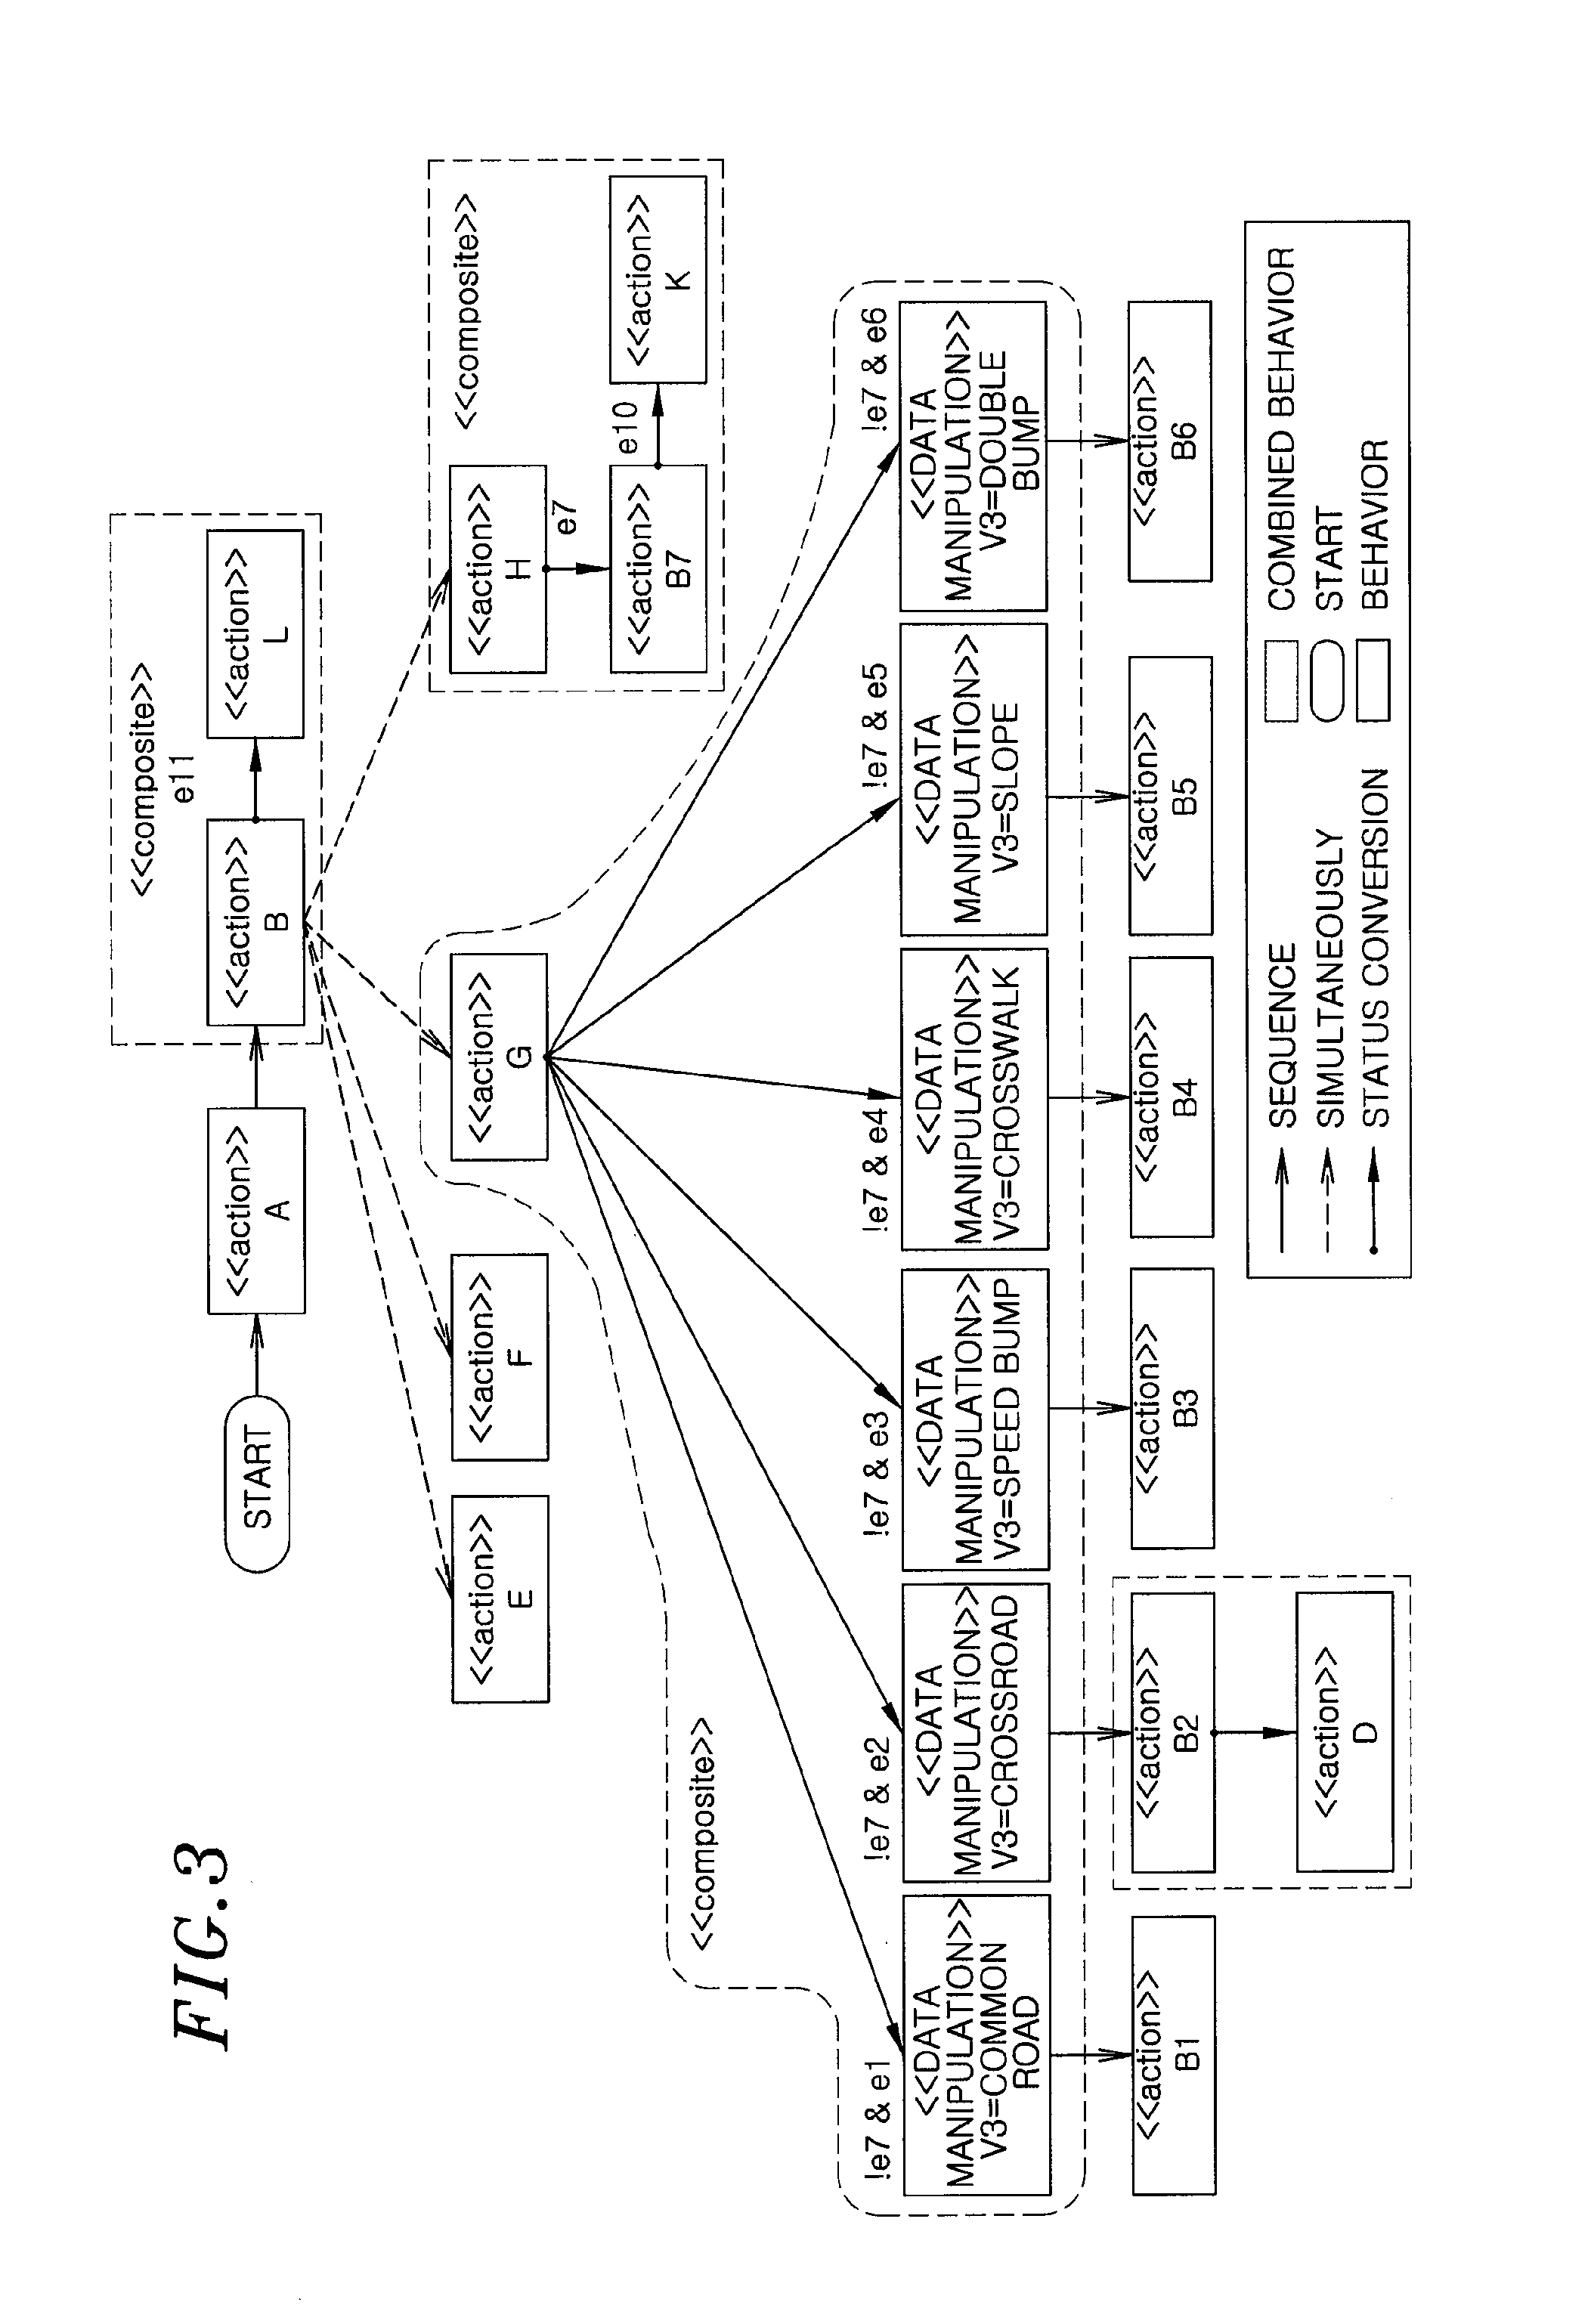 Method and apparatus for authoring task